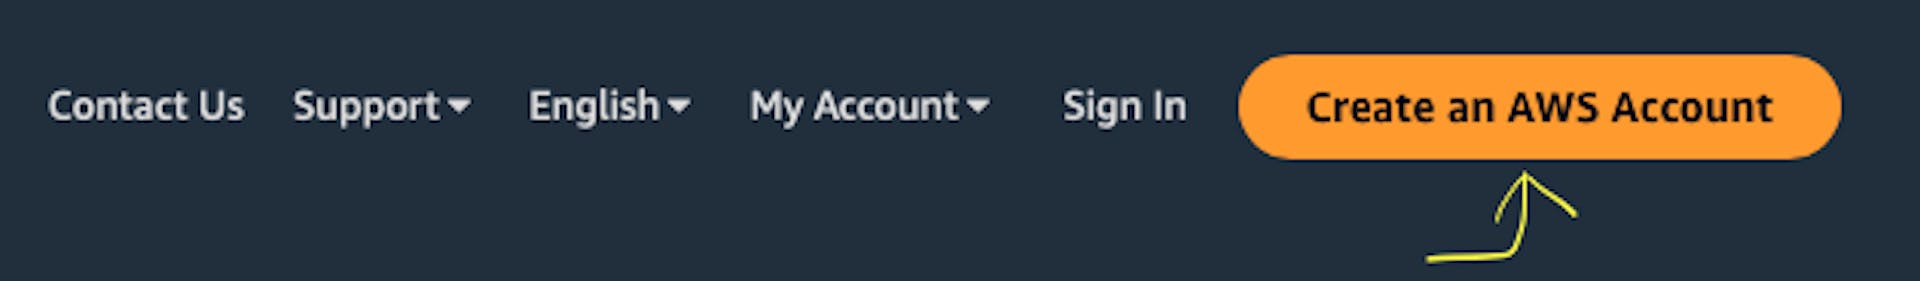 The screenshot of AWS main web page with the pointer to "Create an AWS Account" button